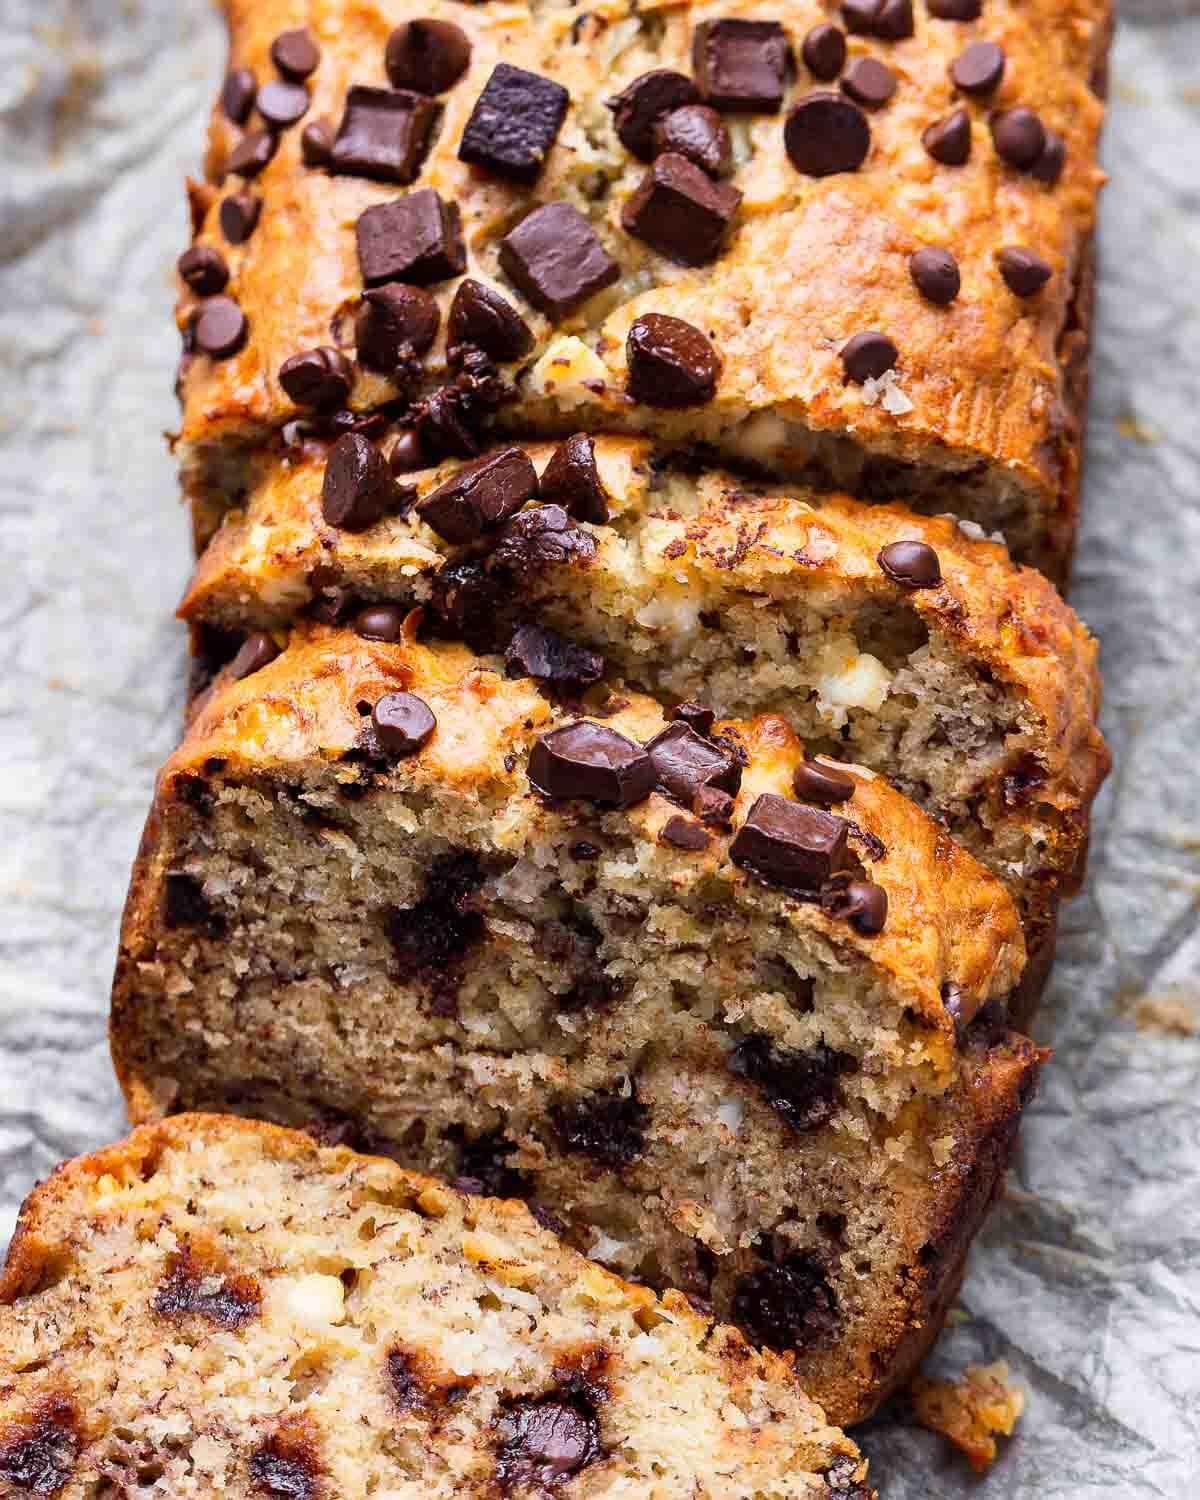 Sliced chocolate chip banana bread on parchment paper.